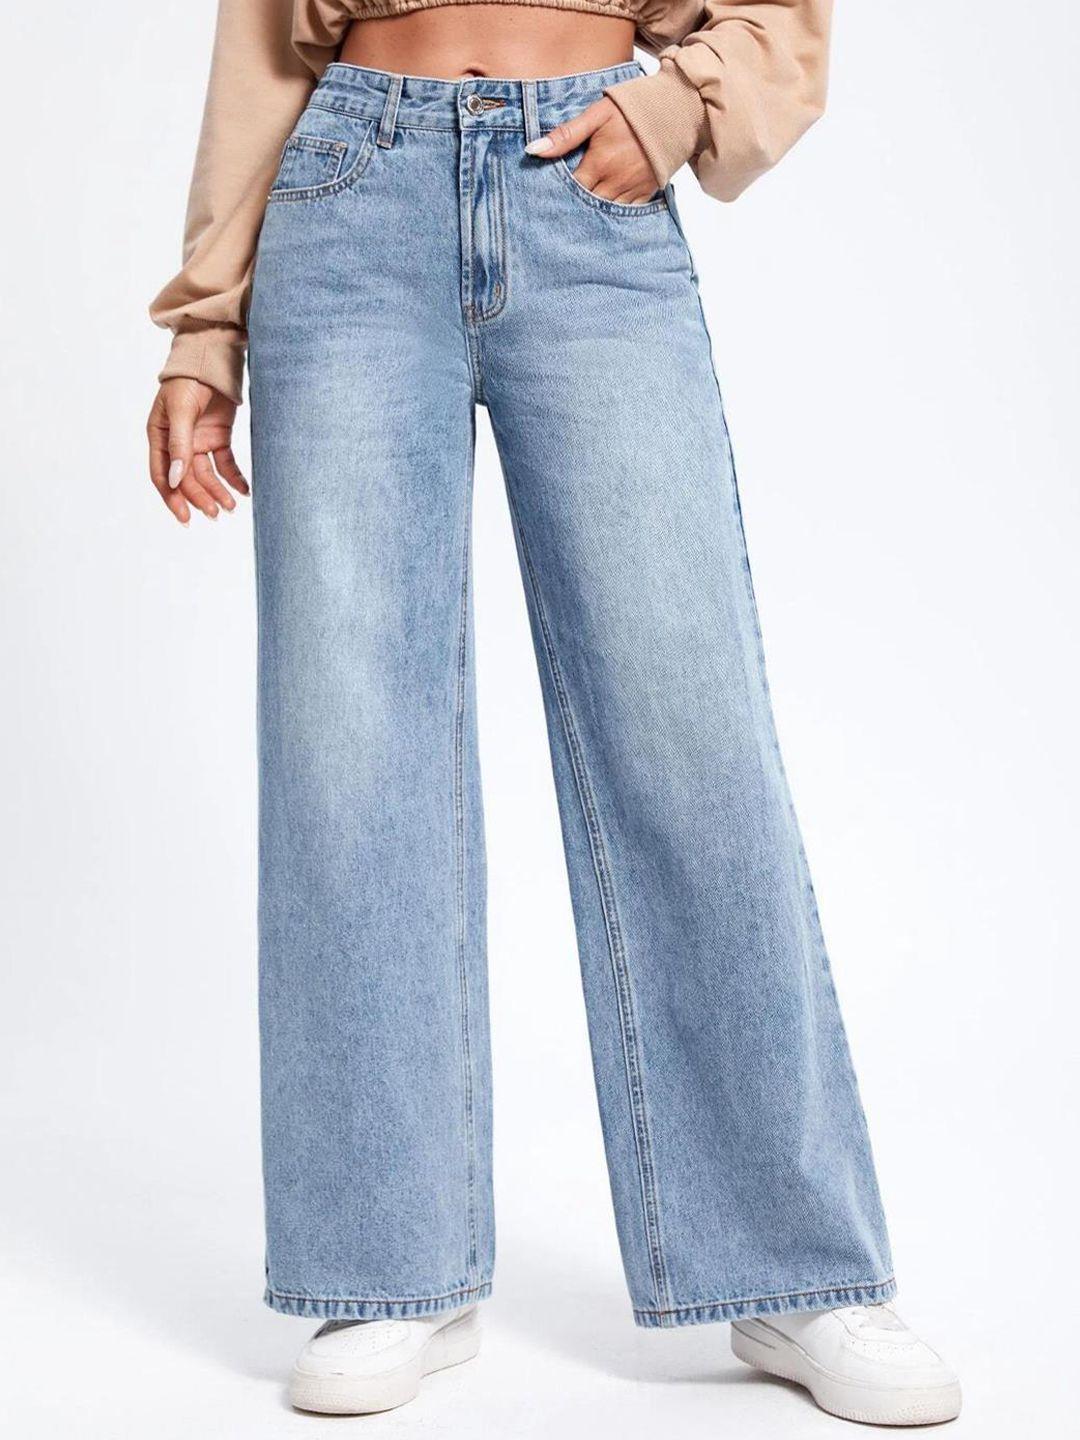 kotty-blue-women-jean-straight-fit-high-rise-heavy-fade-clean-look-stretchable-jeans